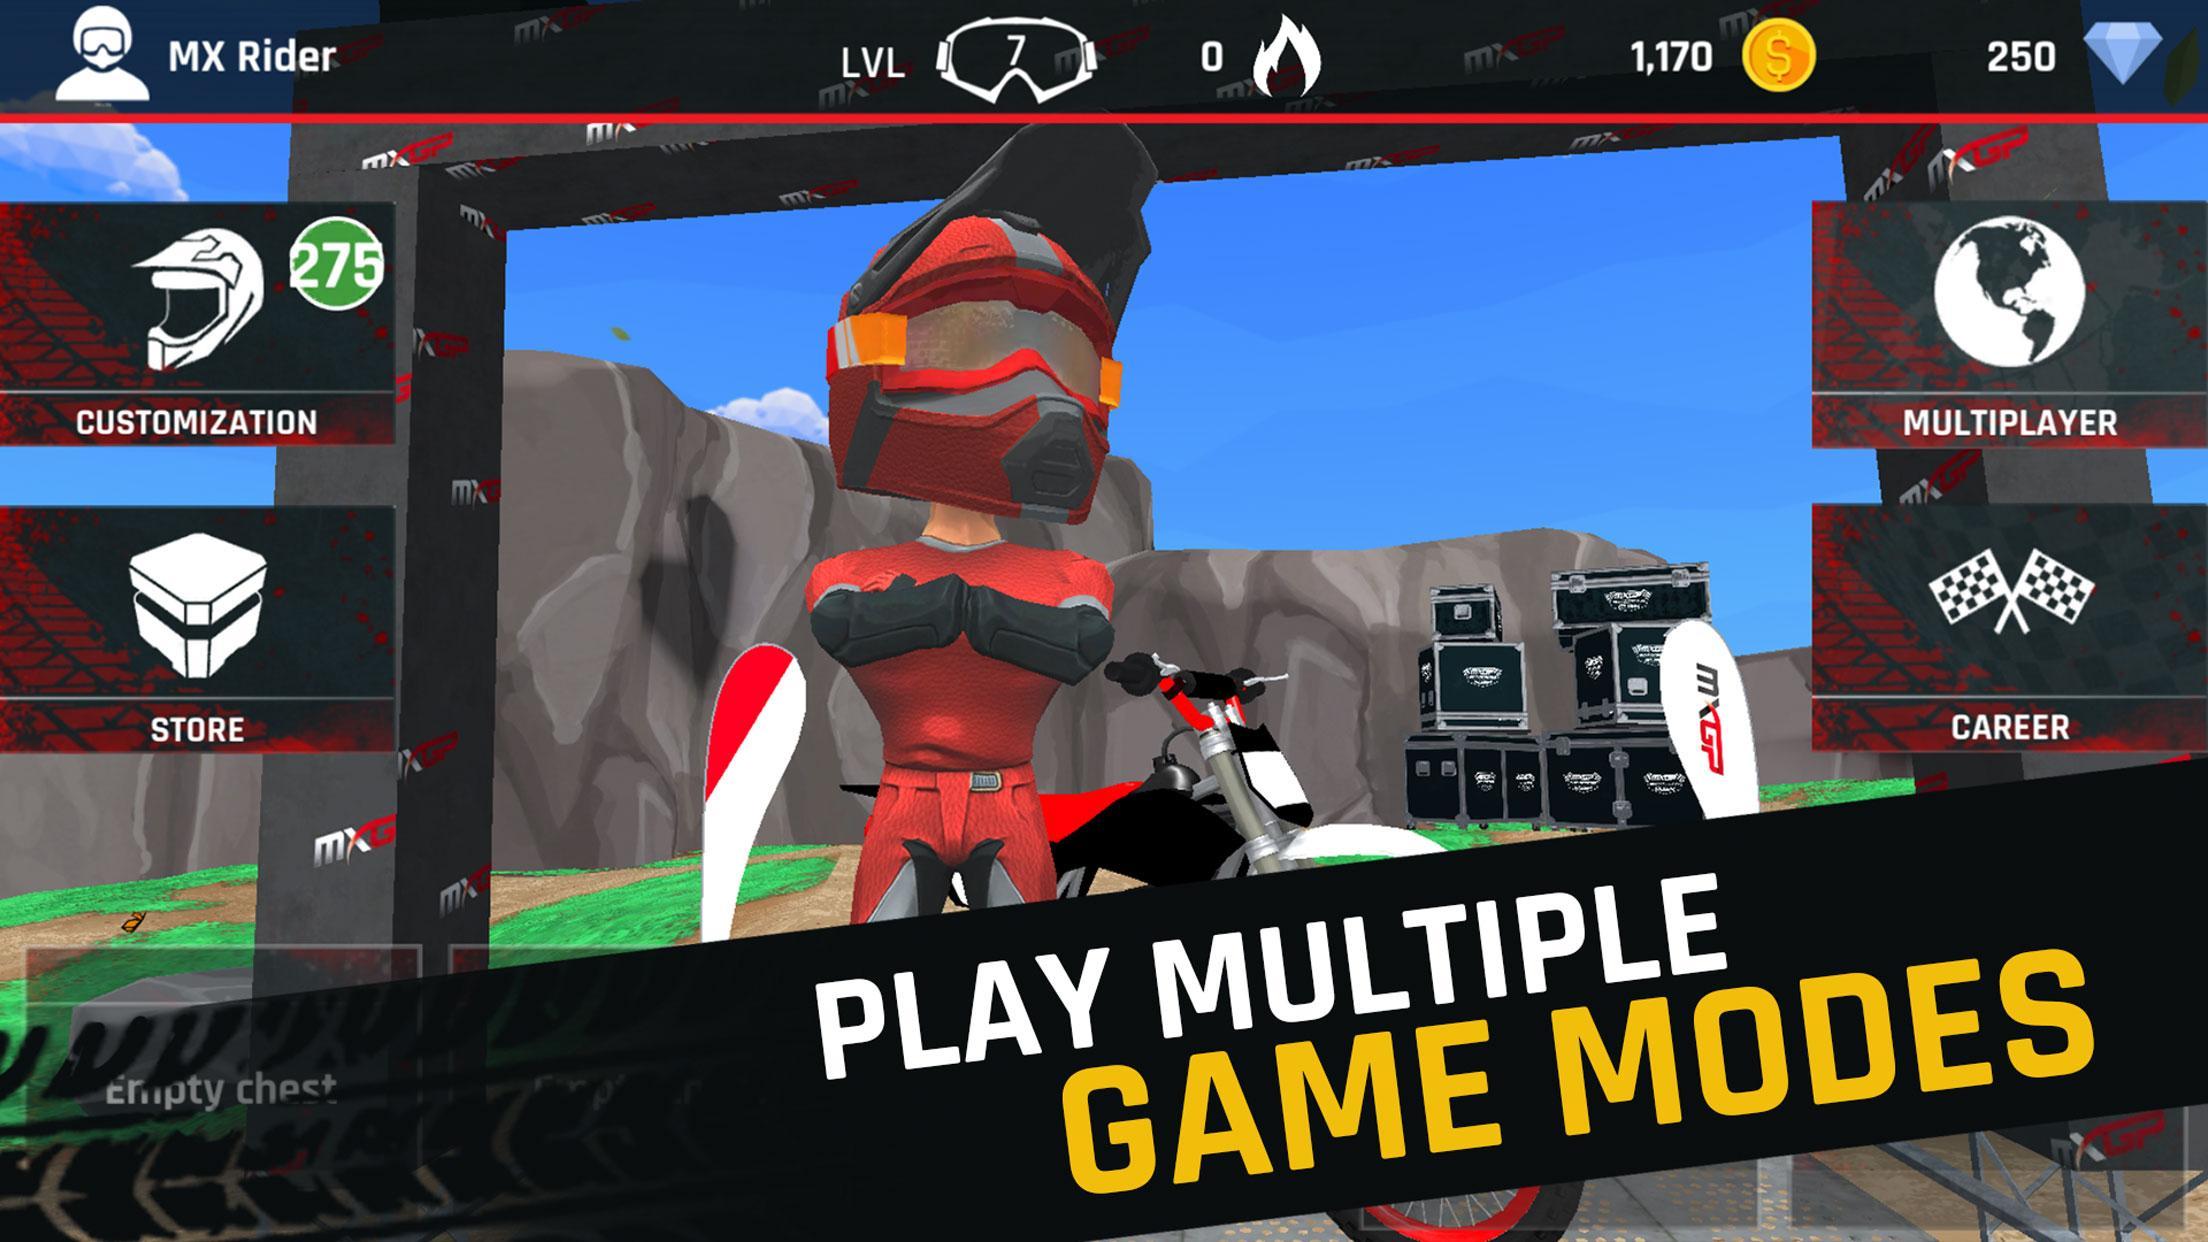 download game mxgp 2020 android